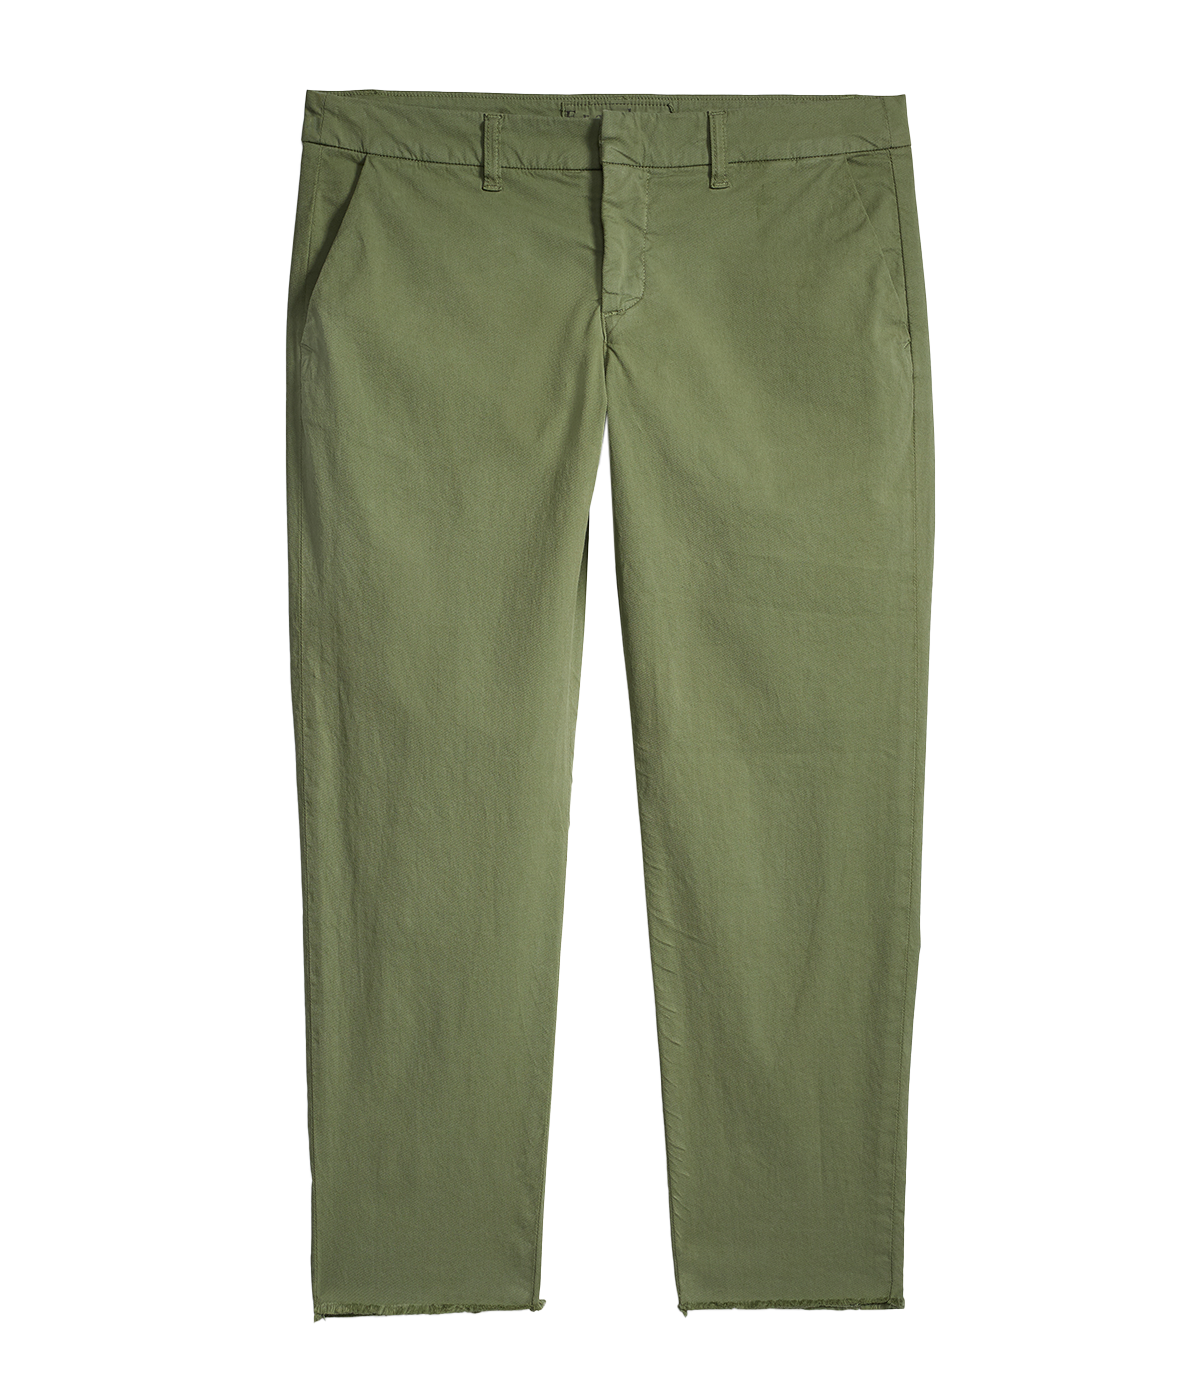 The Wicklow Chino in Army